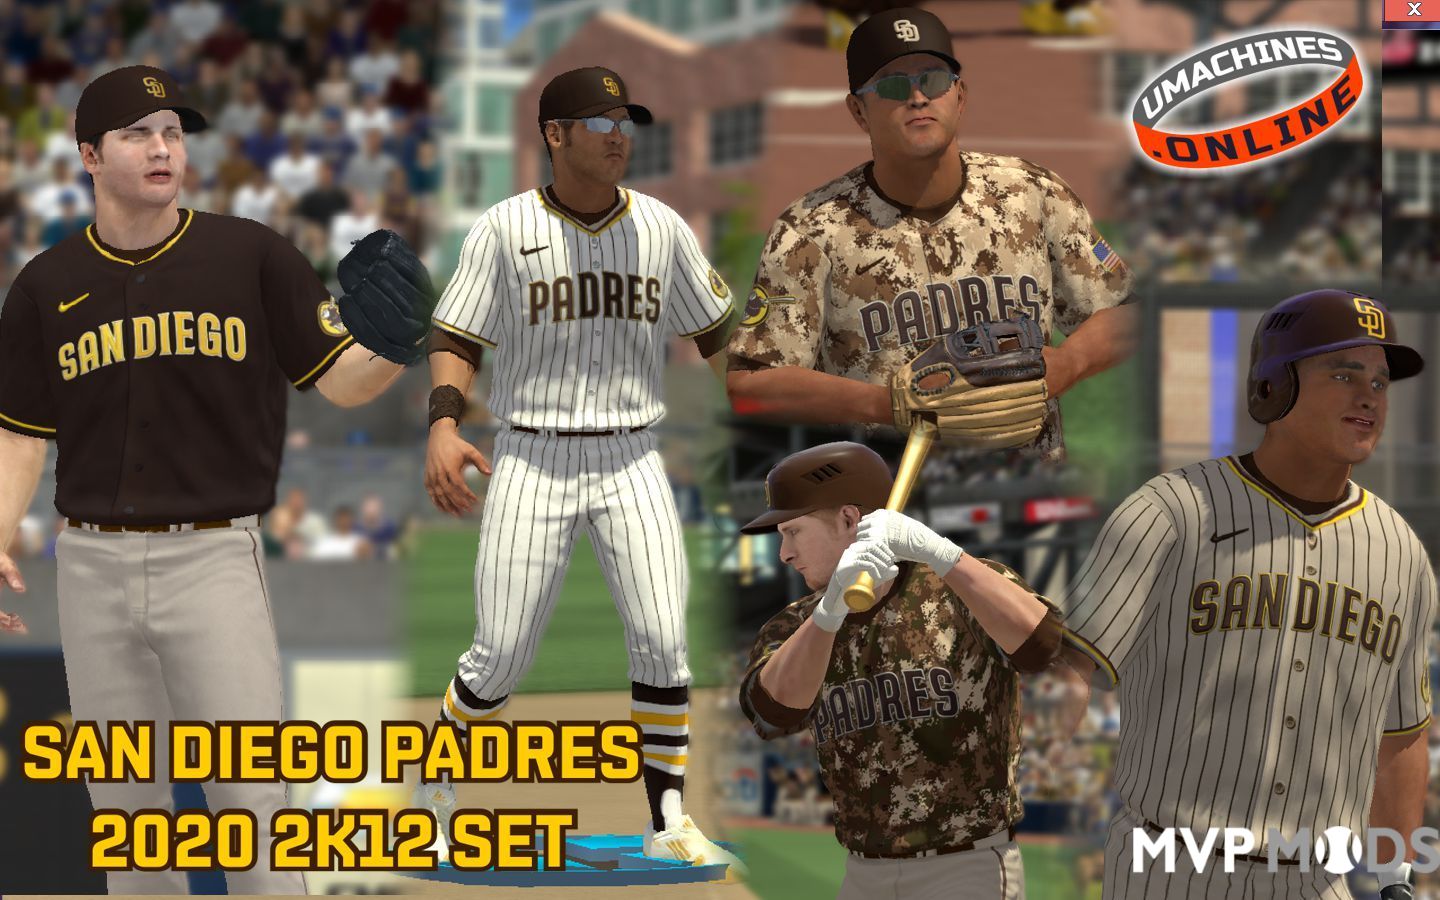 padres camouflage jersey